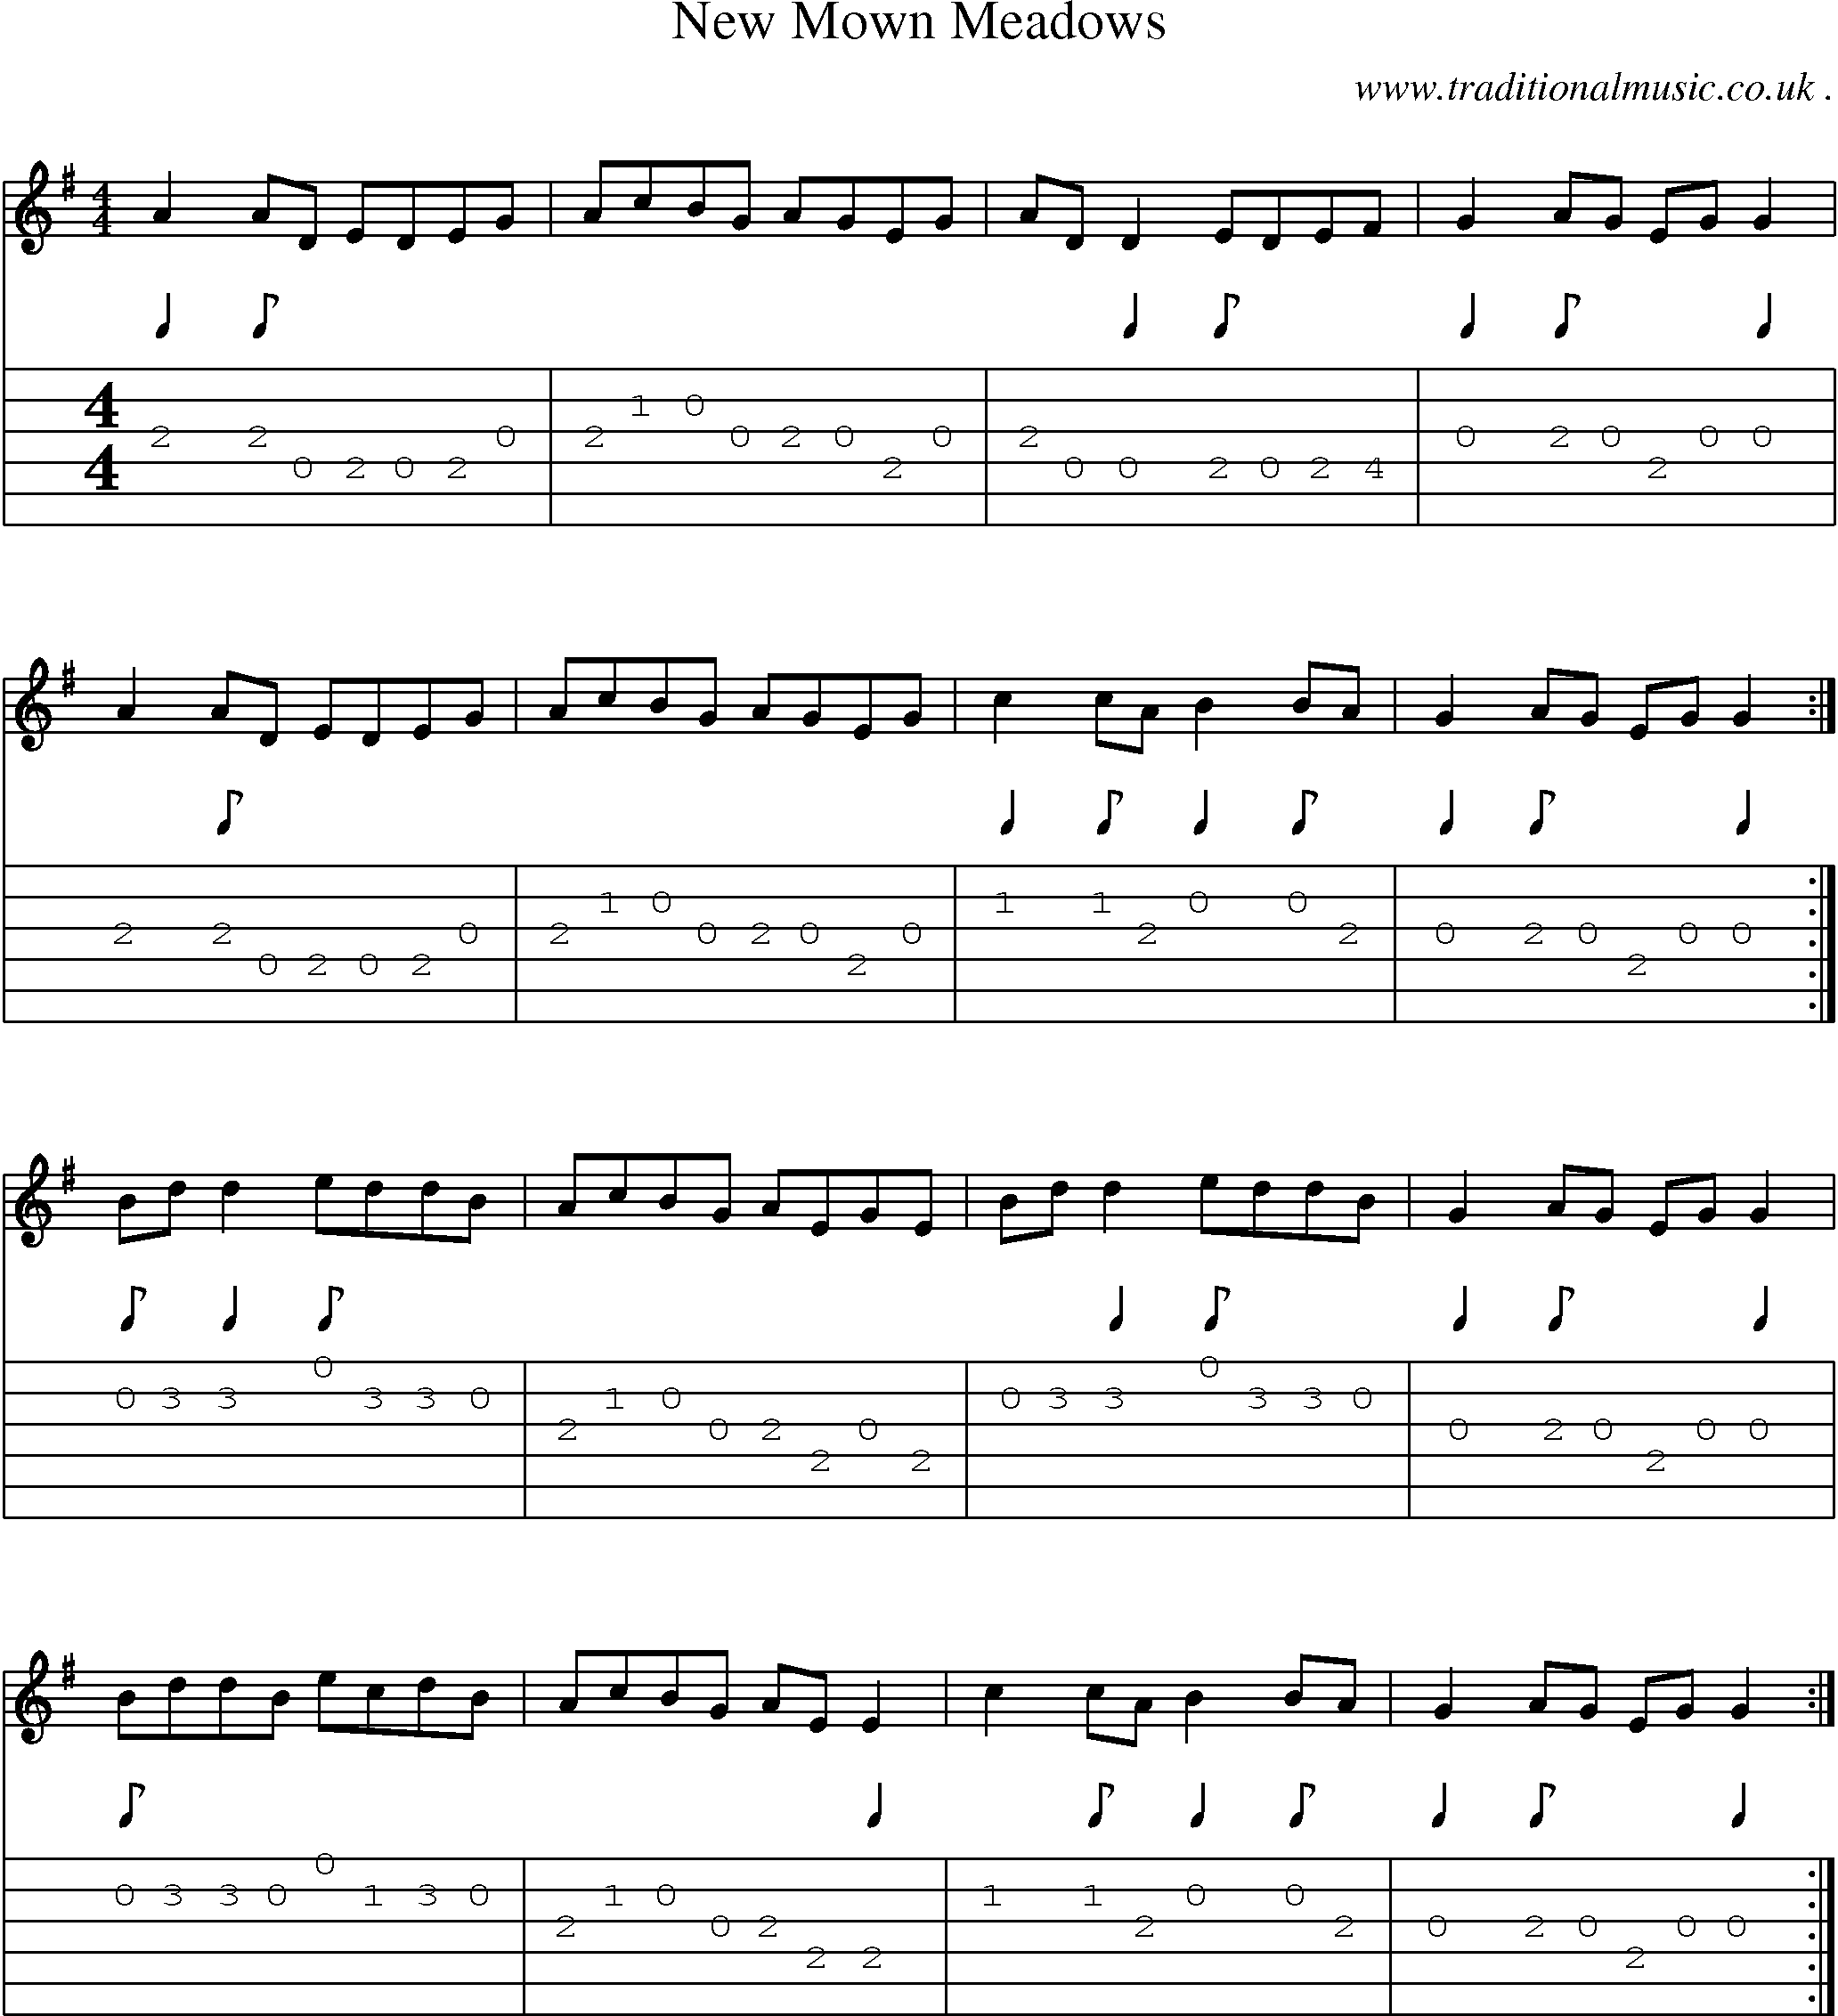 Sheet-music  score, Chords and Guitar Tabs for New Mown Meadows